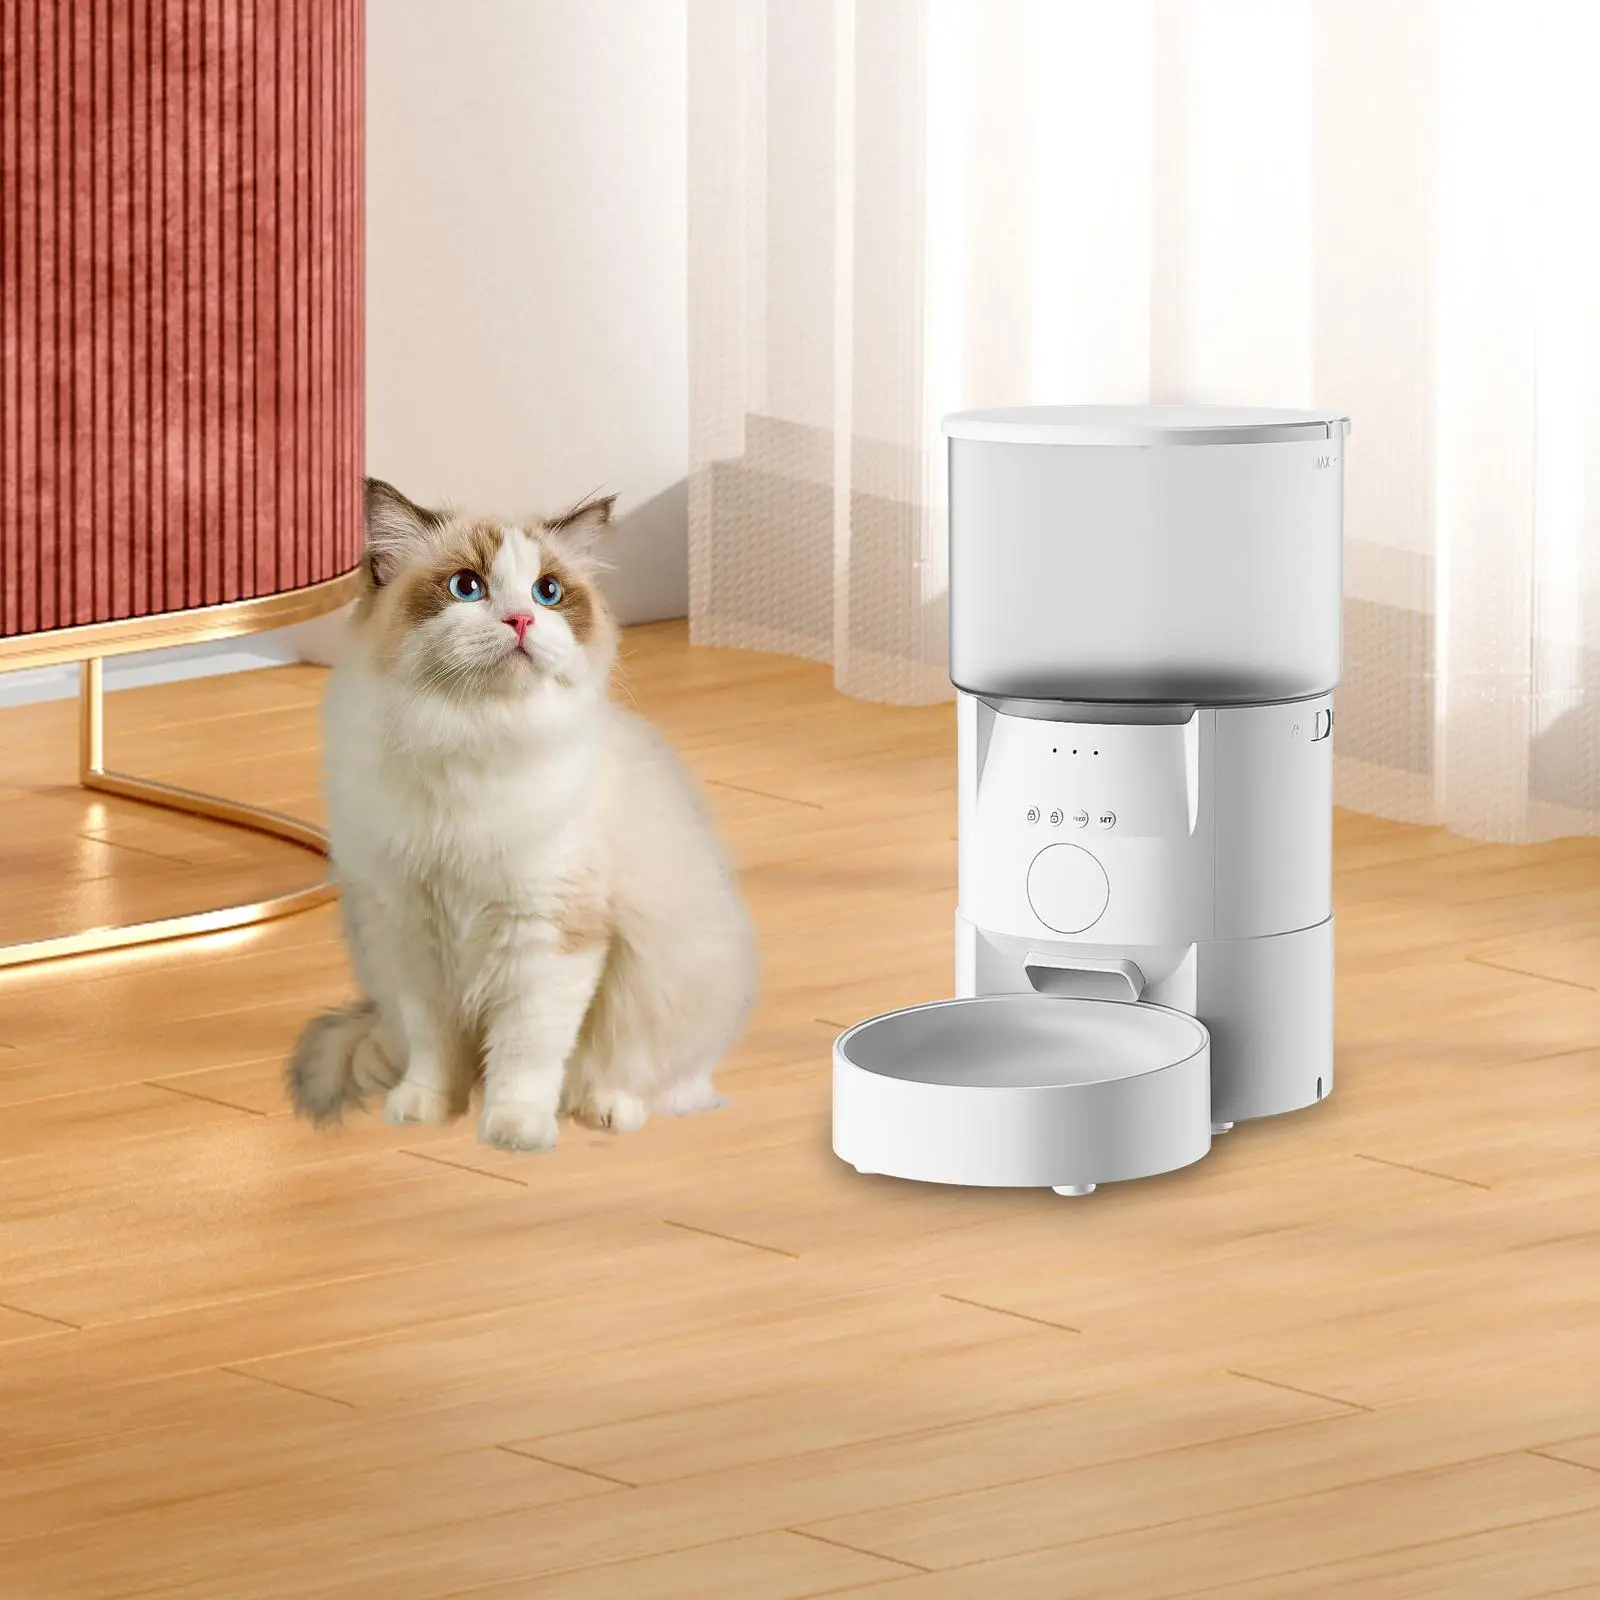 

Cat Feeder Automatic with App Control Portion Control for Pets Dry Food Cats